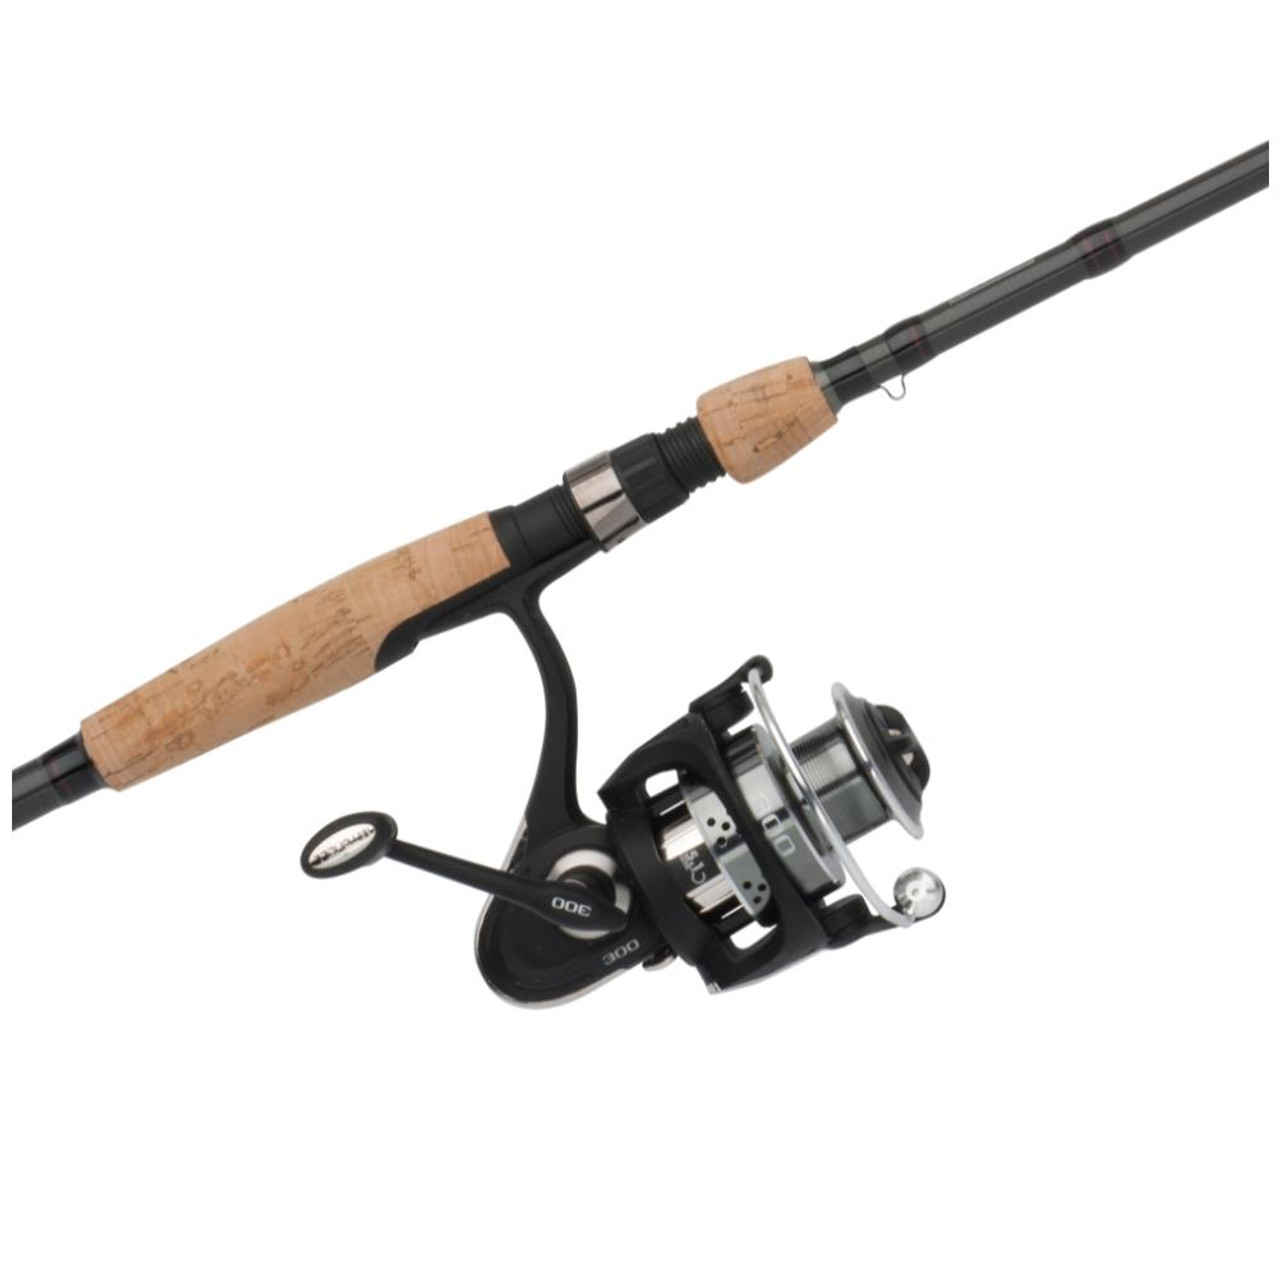 https://cdn11.bigcommerce.com/s-stfpjhht/images/stencil/1280x1280/products/11249/25906/Mitchell-308-Spinning-Reel-Combo-308-60M1-022021998074_image1__20478.1512497355.jpg?c=2